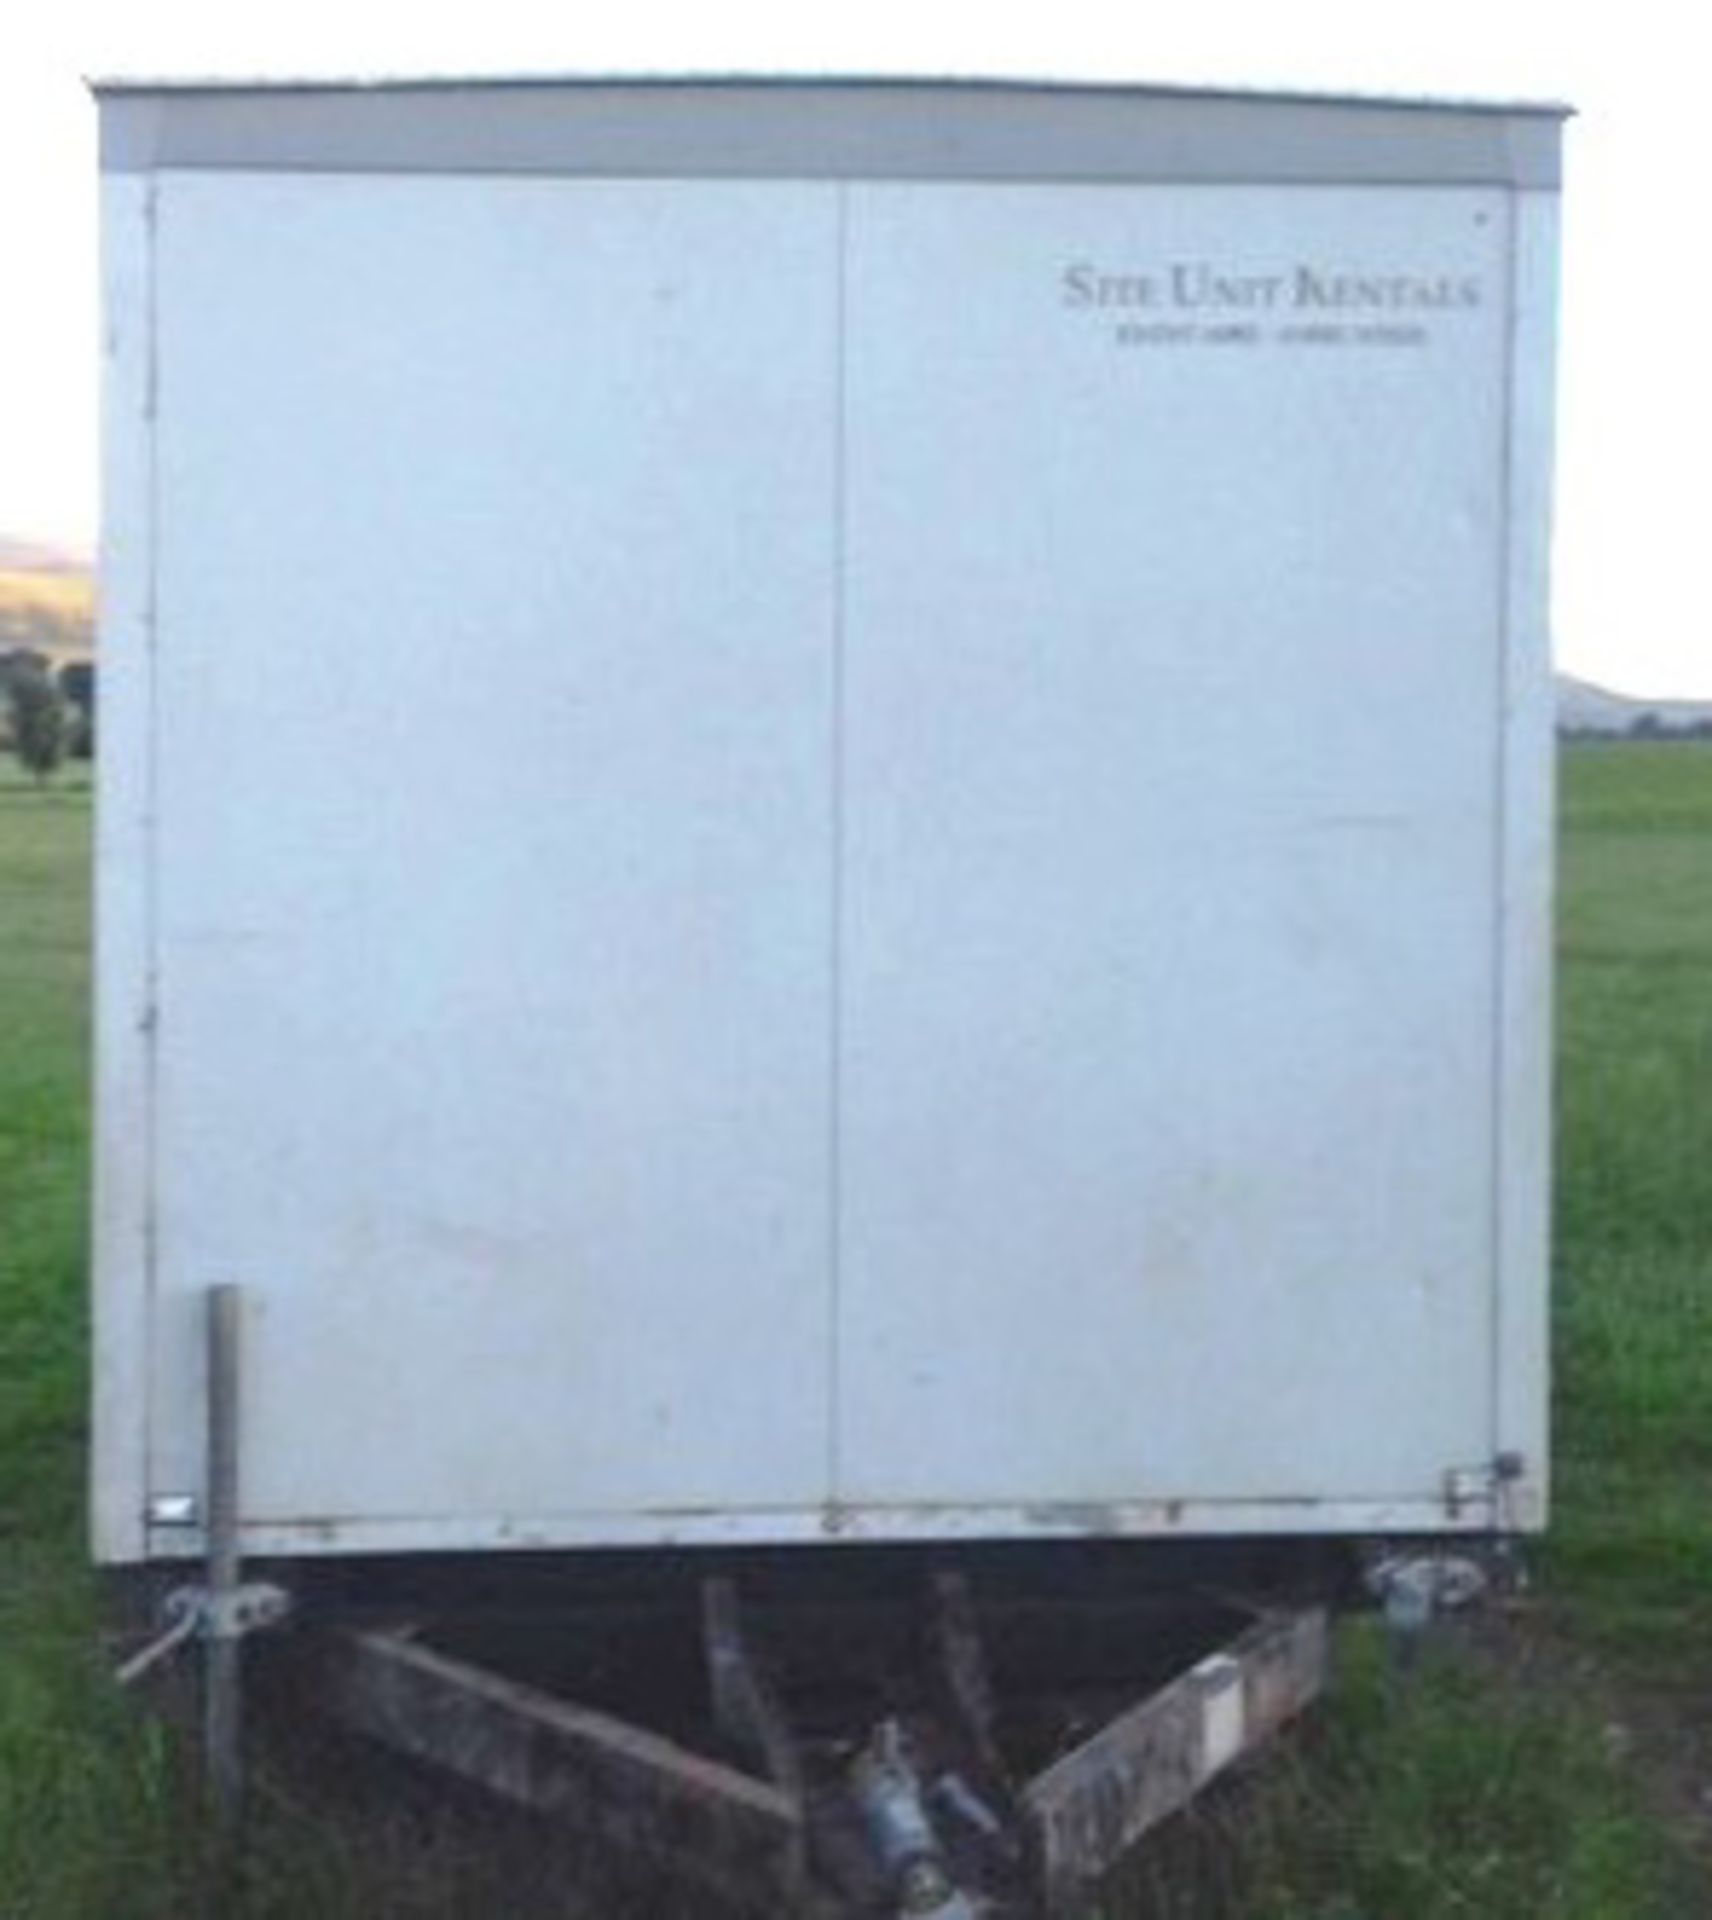 Event hire mobile toilet block c/w 1996 roll-a-long 20' x 7' trailer on springs. Fully equipped for - Bild 2 aus 9